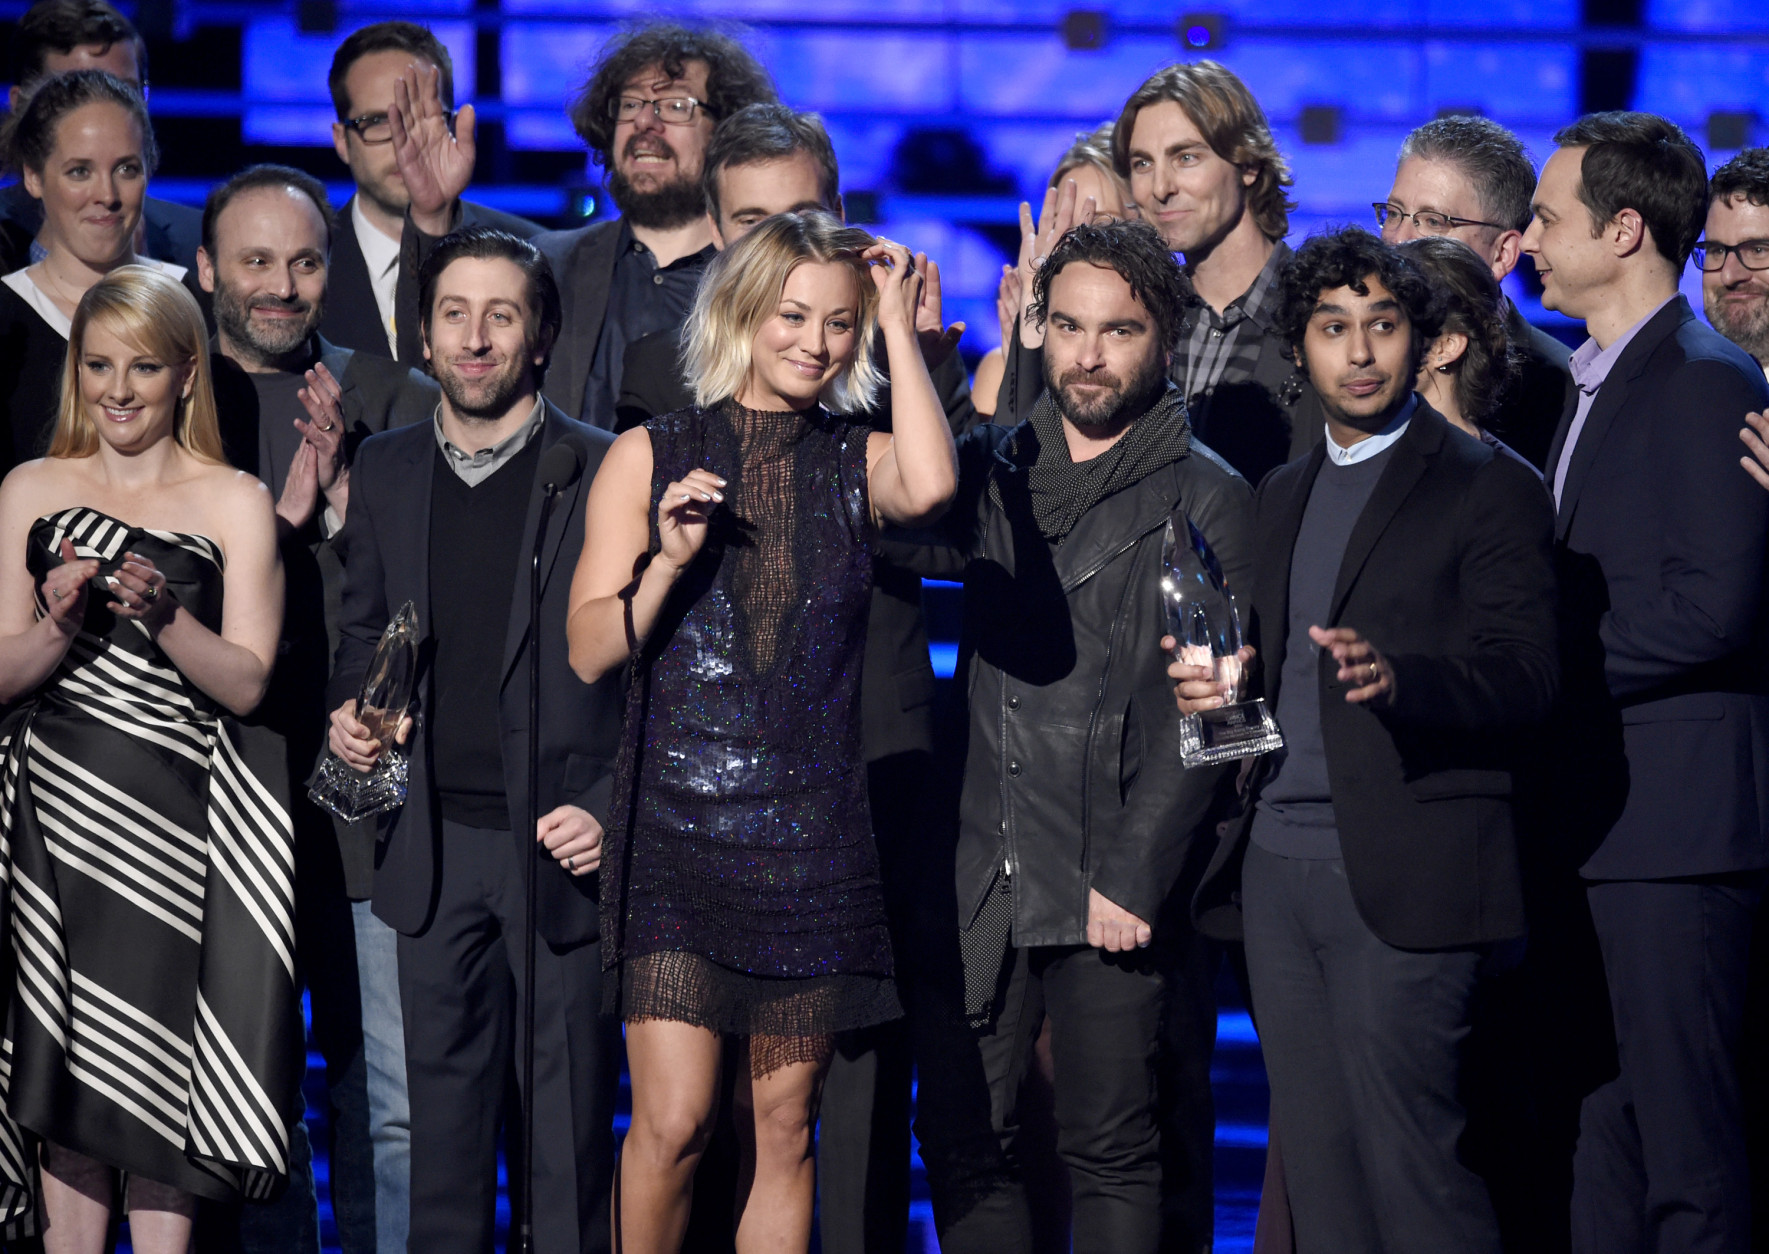 Kaley Cuoco, center, and the cast and crew of "The Big Bang Theory" accept the award for favorite network tv comedy at the People's Choice Awards at the Microsoft Theater on Wednesday, Jan. 6, 2016, in Los Angeles. (Photo by Chris Pizzello/Invision/AP)